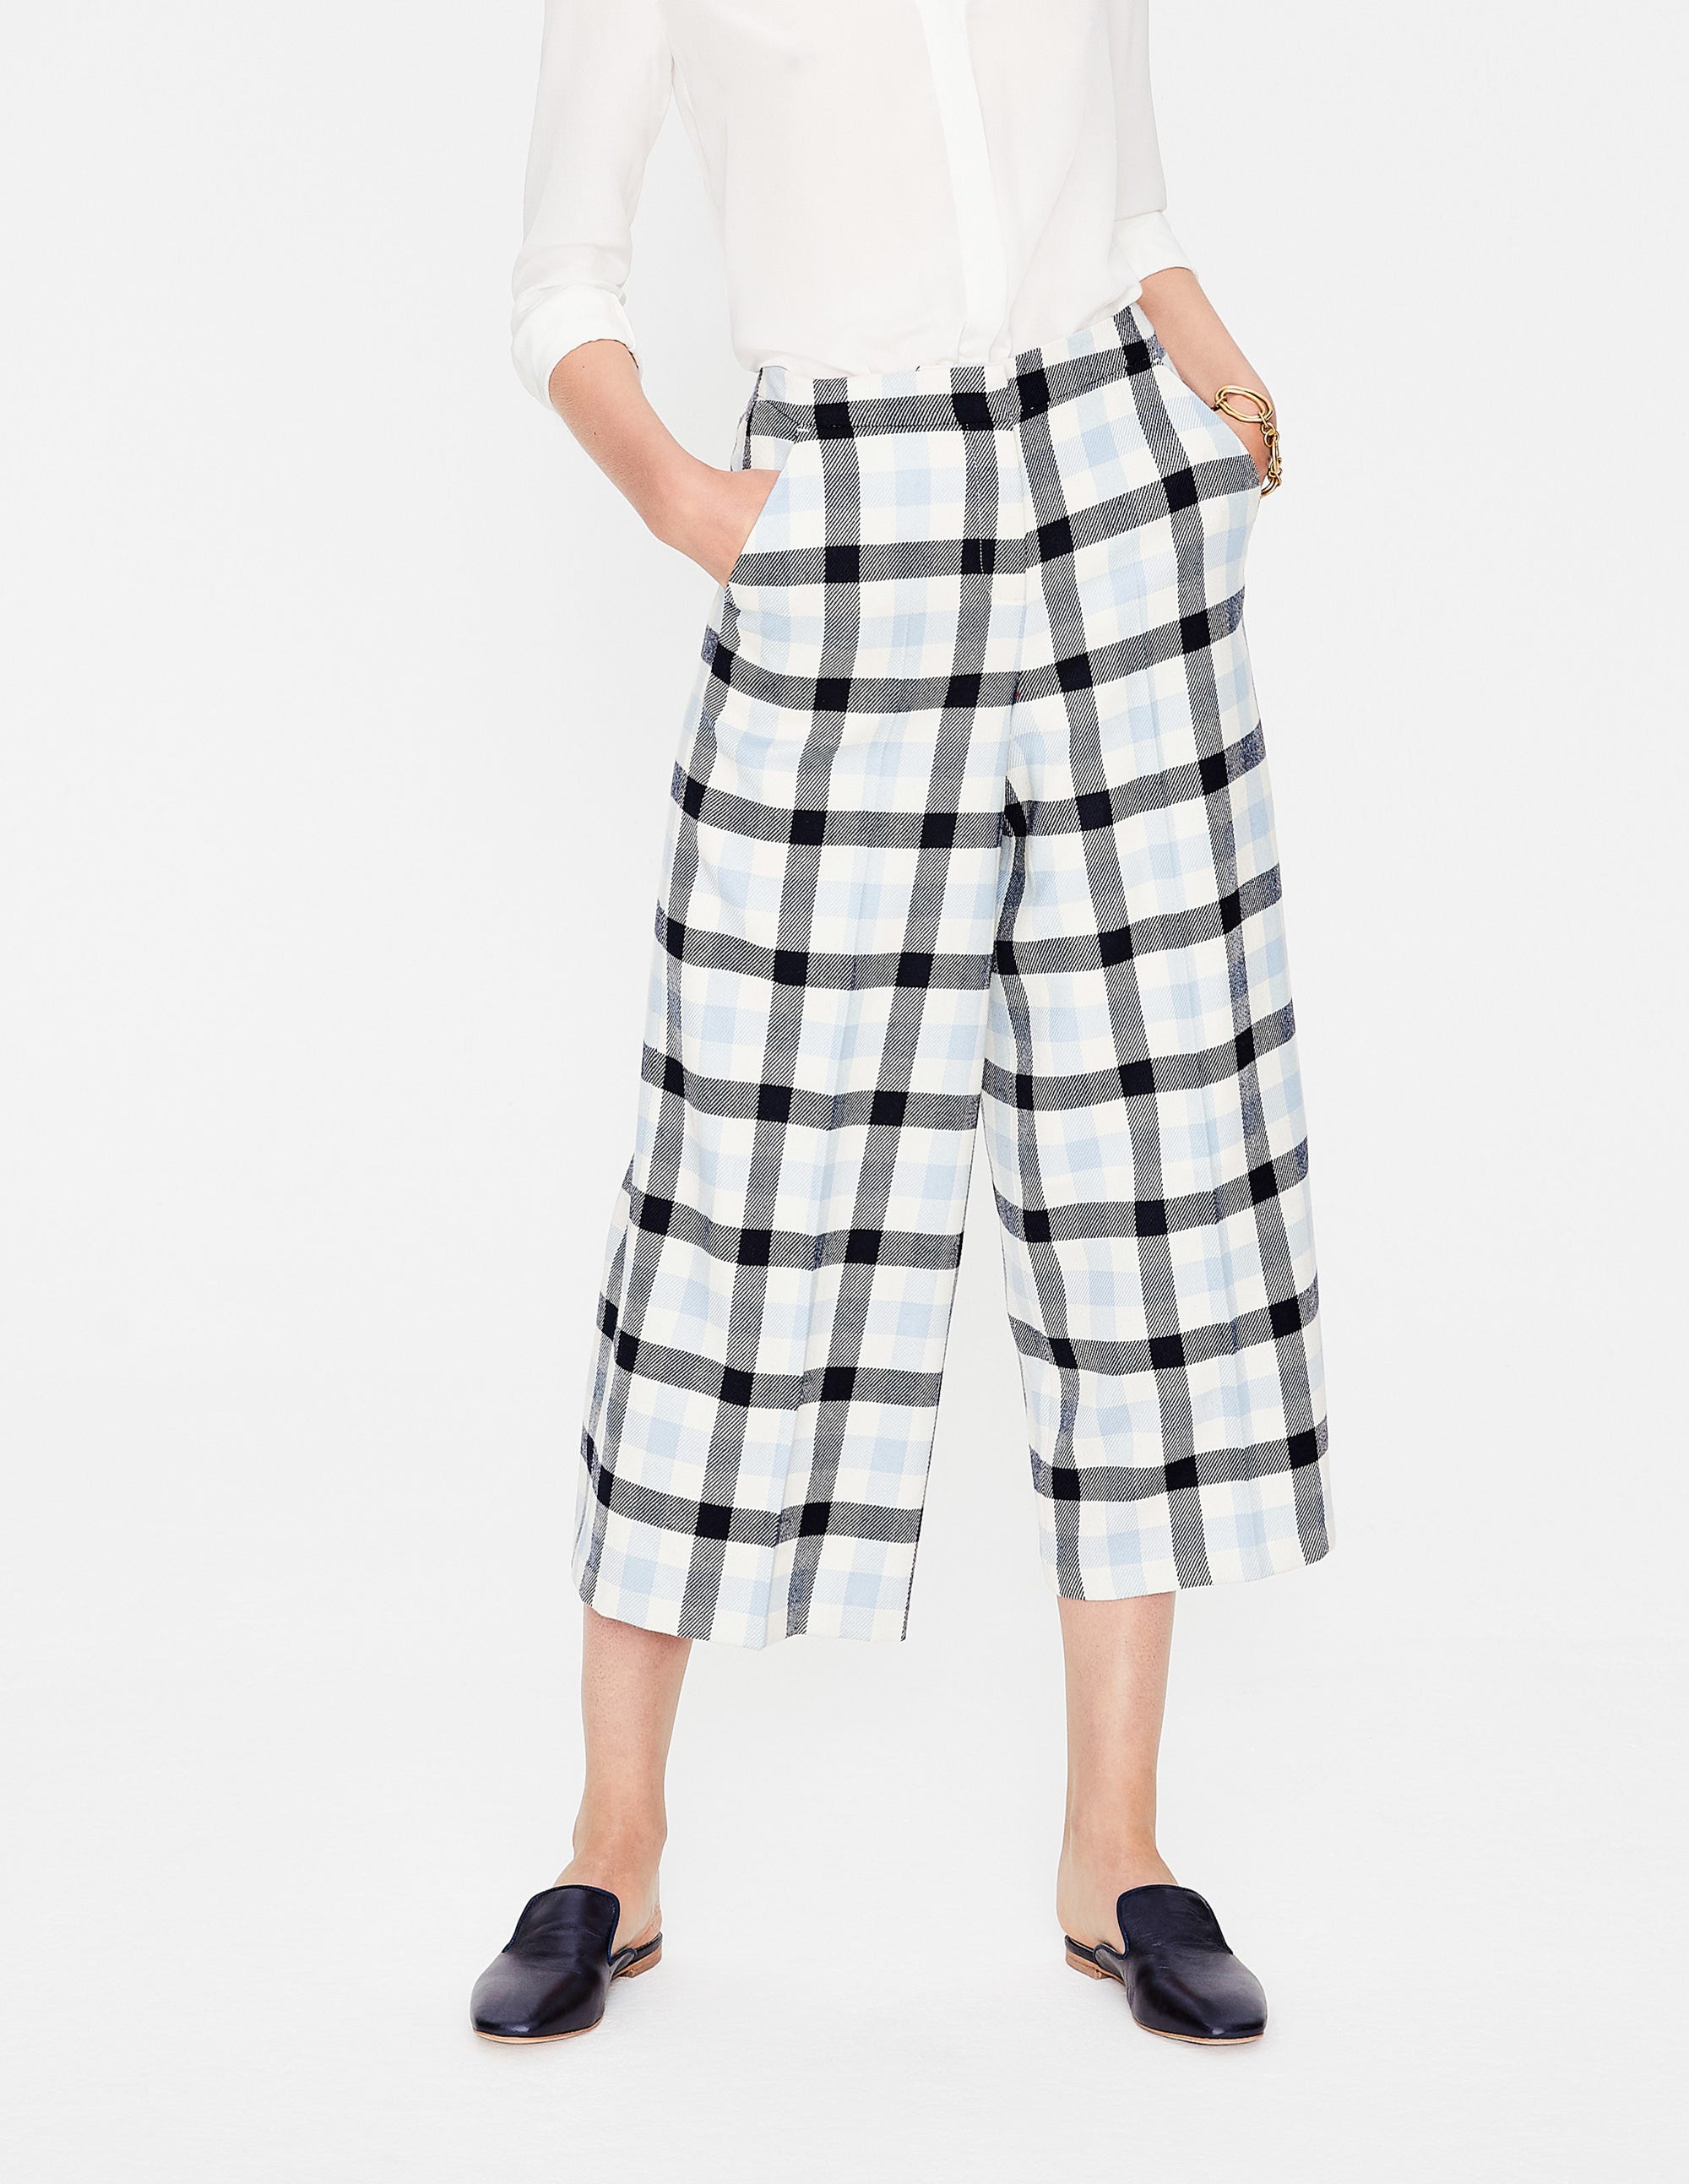 British Tweed Culottes - Ivory, Navy and Breeze Check | Boden US